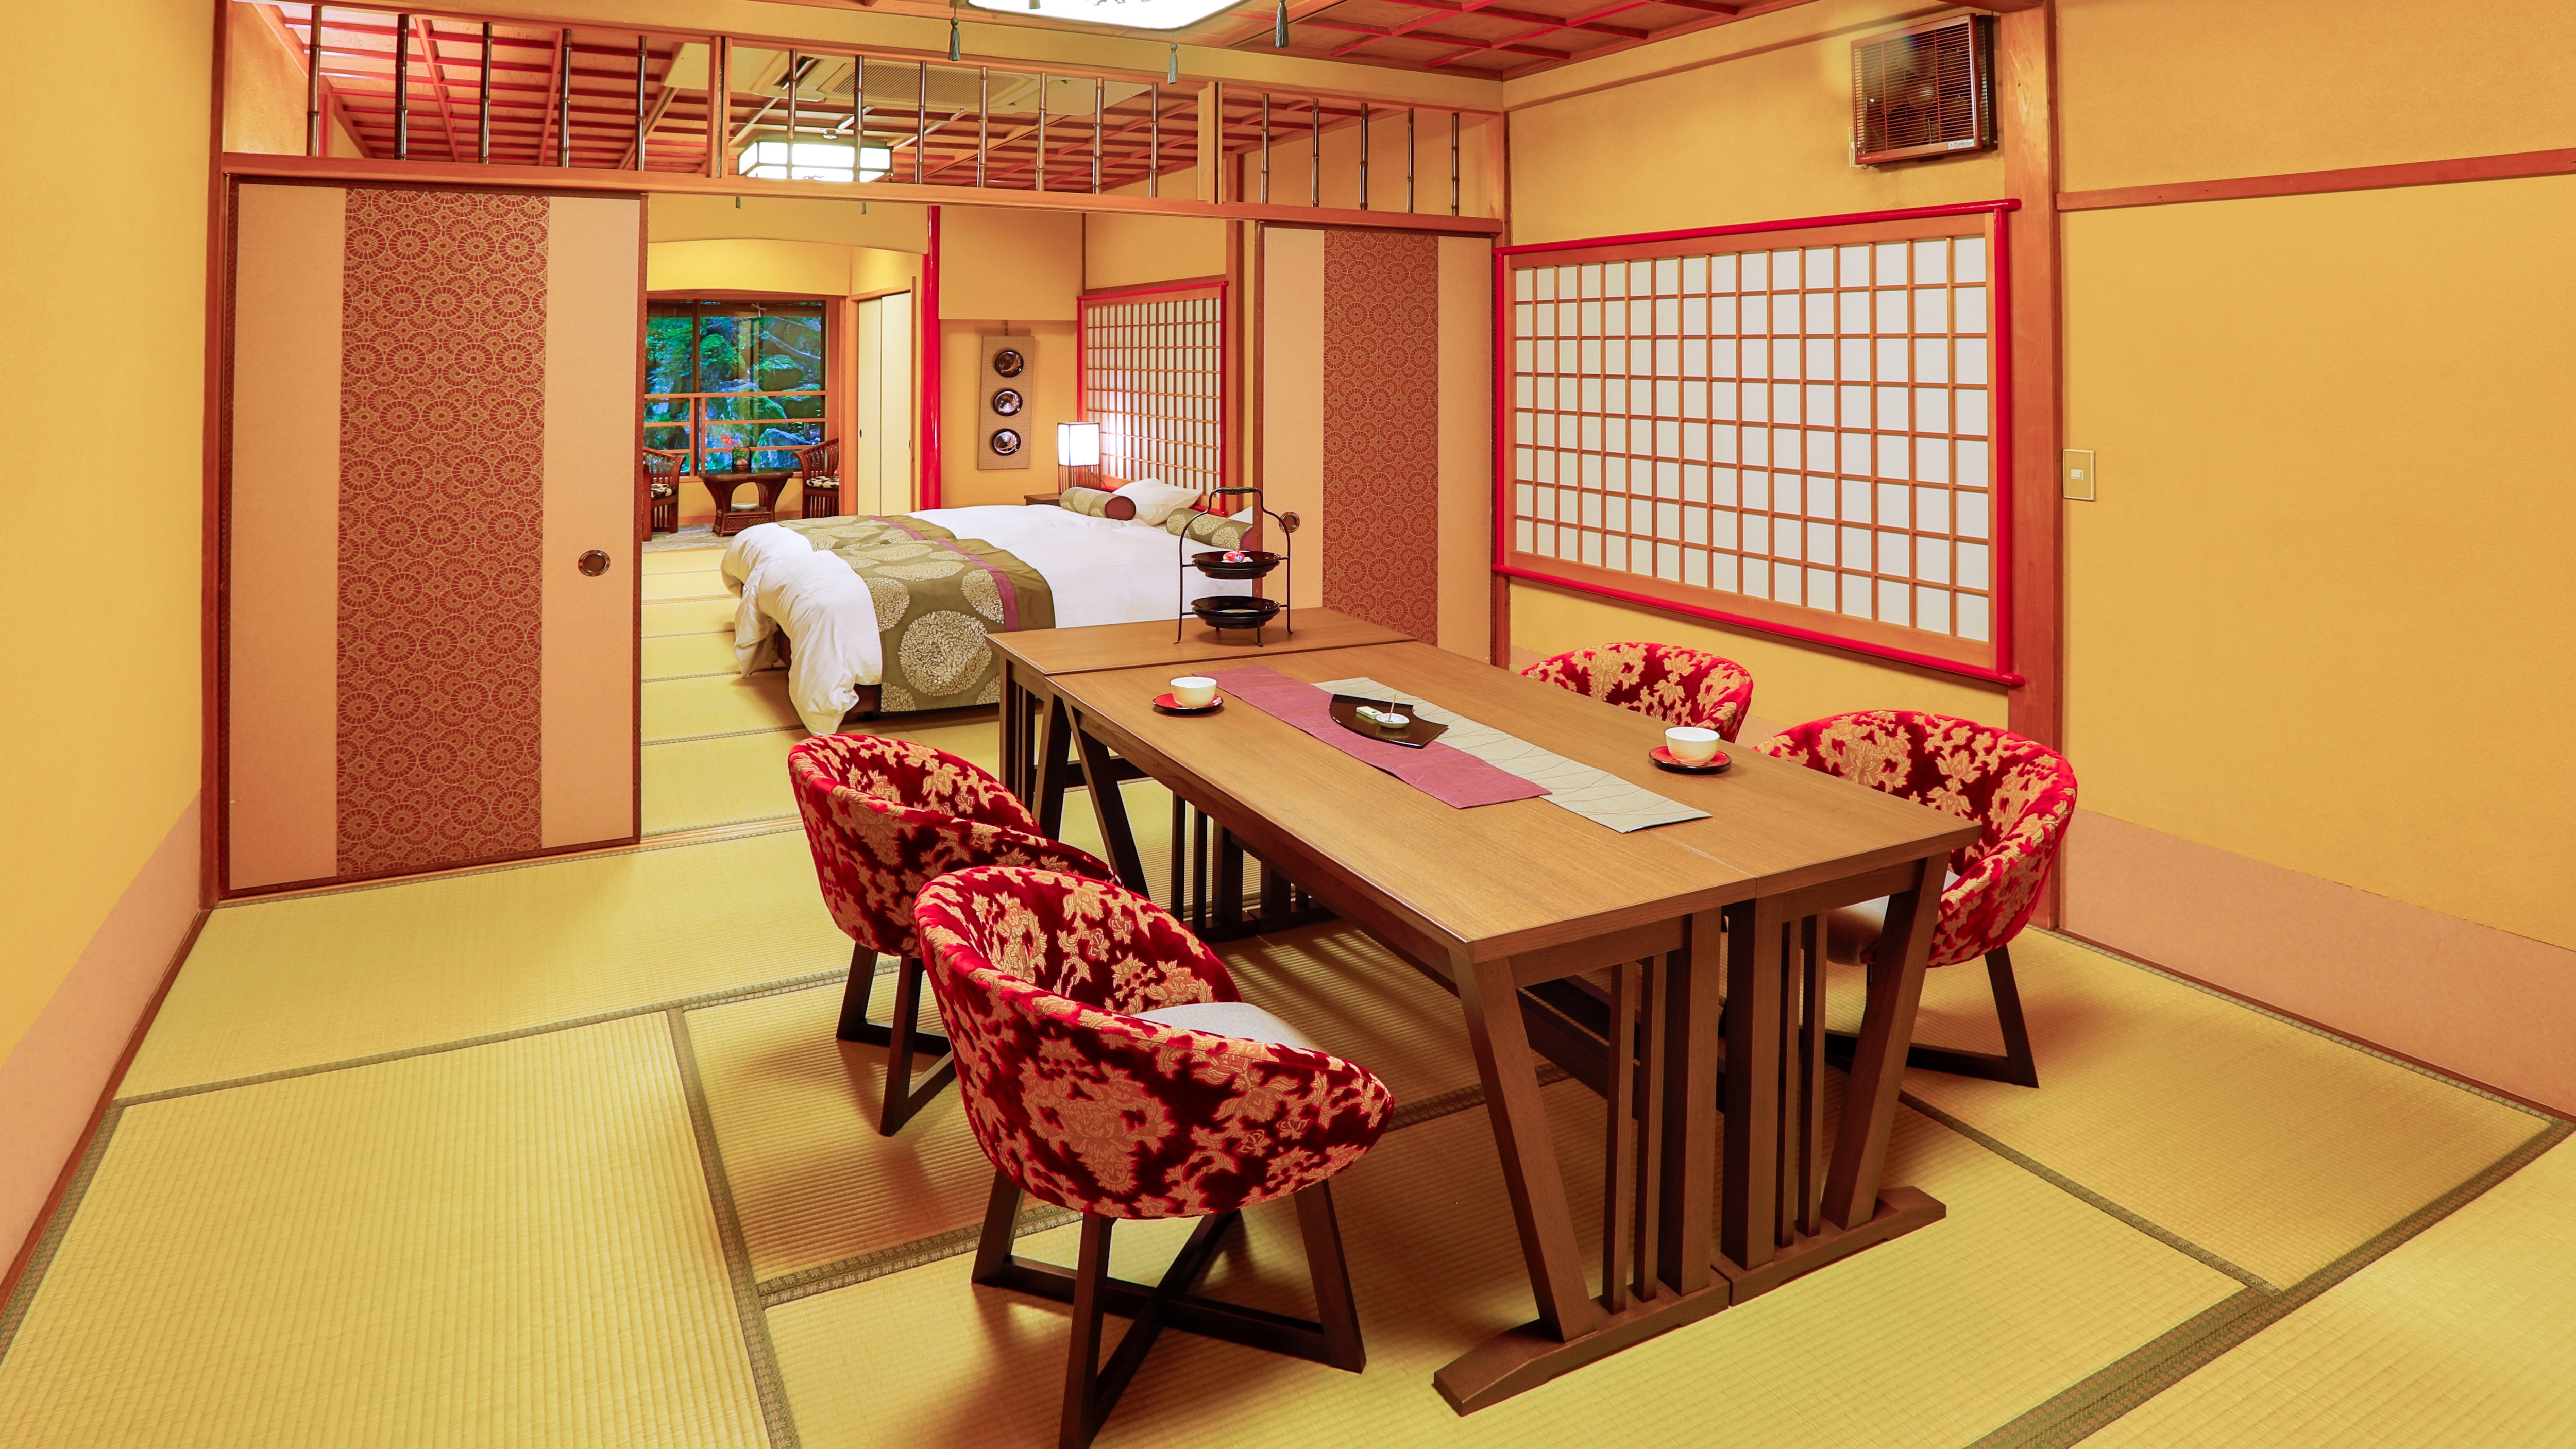 Guest room [Water lily] A special room with 23 tatami mats in the dining room and bedroom